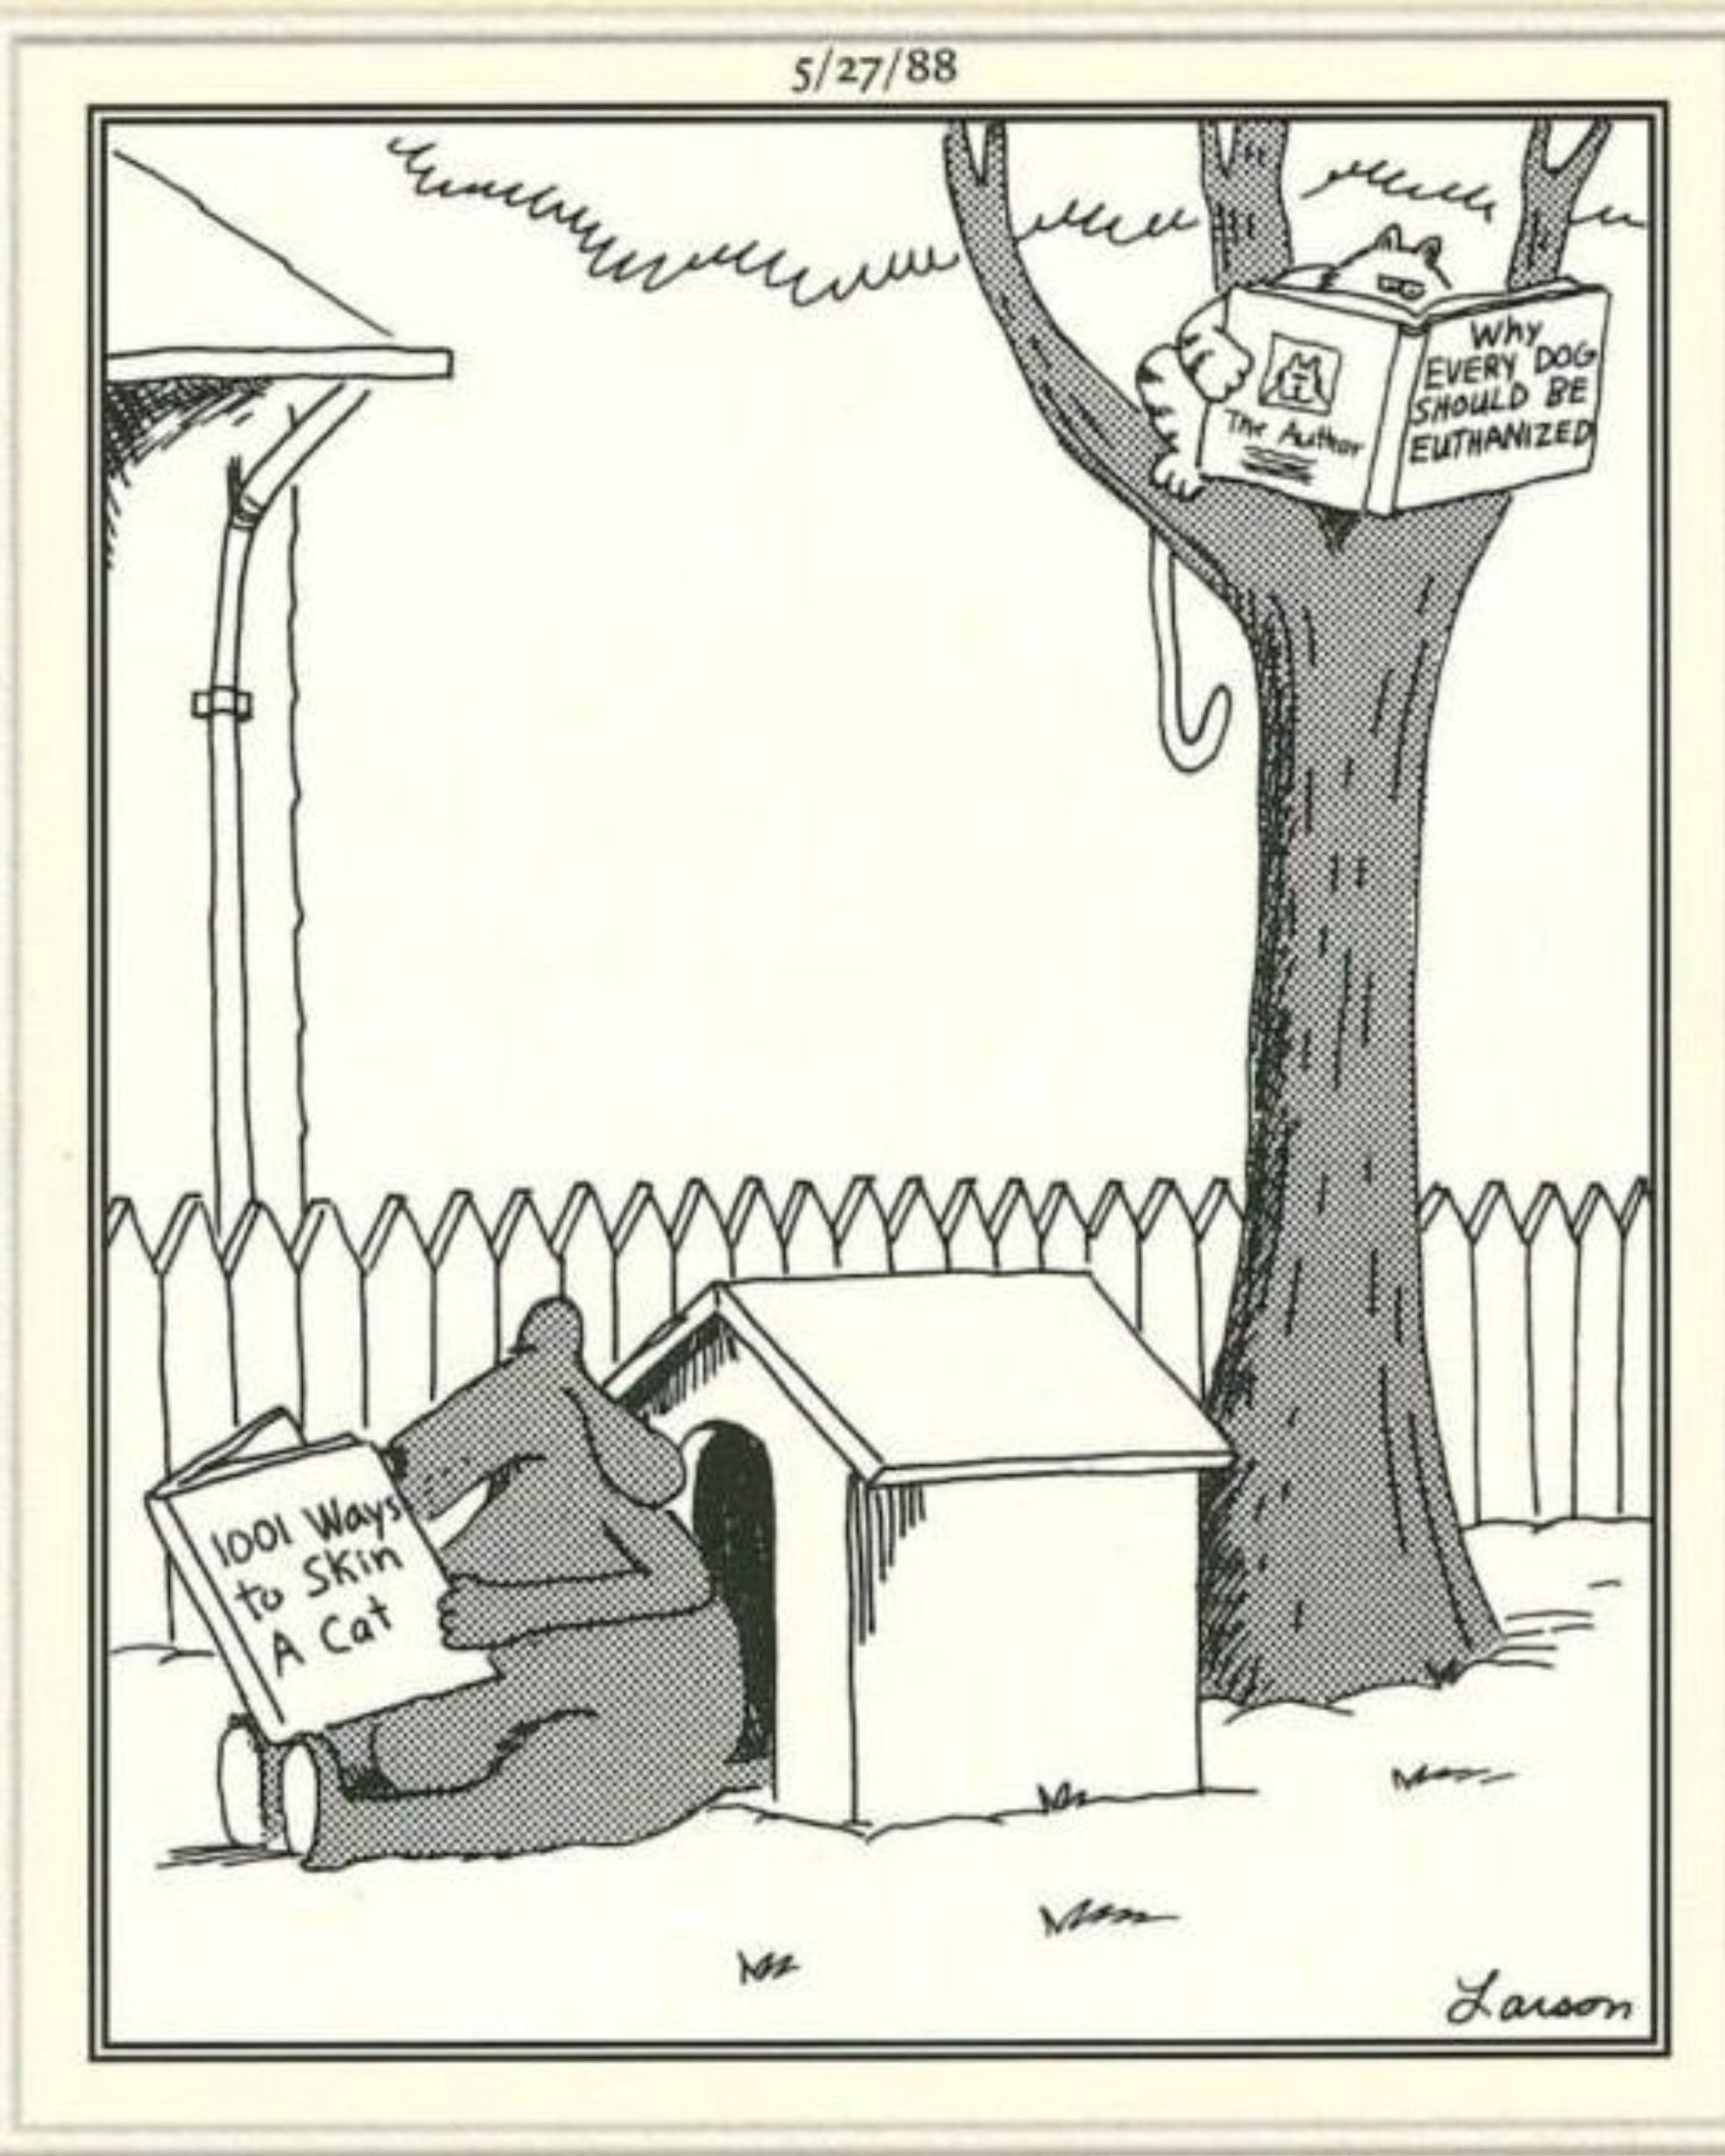 The Most Unsettling Far Side Comics Ever Are As Hilarious As They Are Disturbing